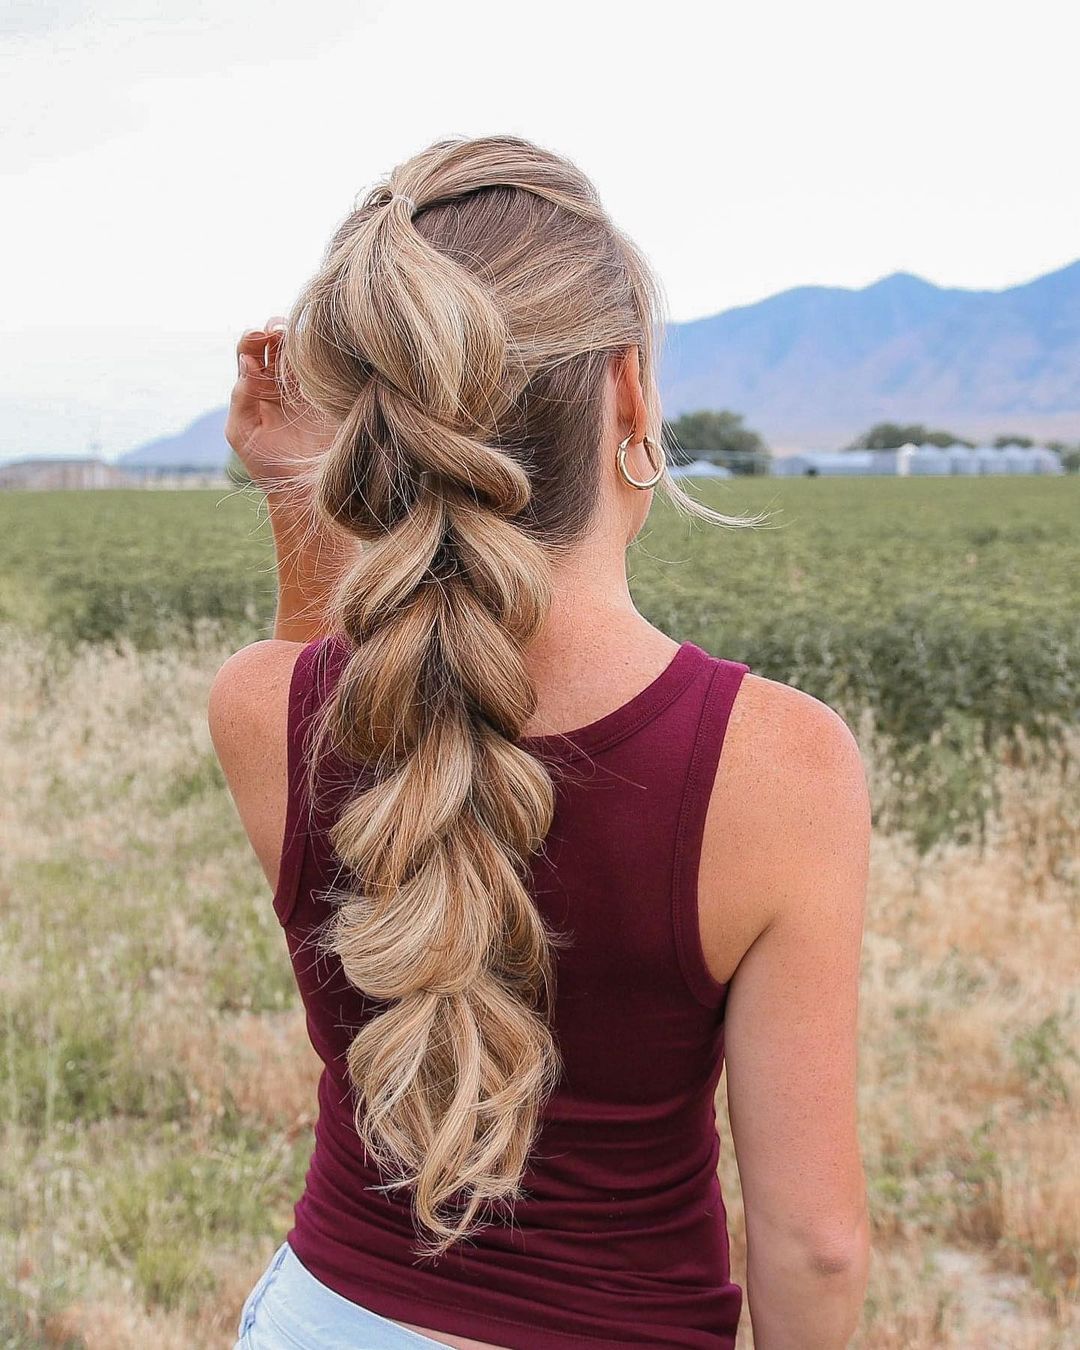 5 Minute Braid Hairstyle for Everyday